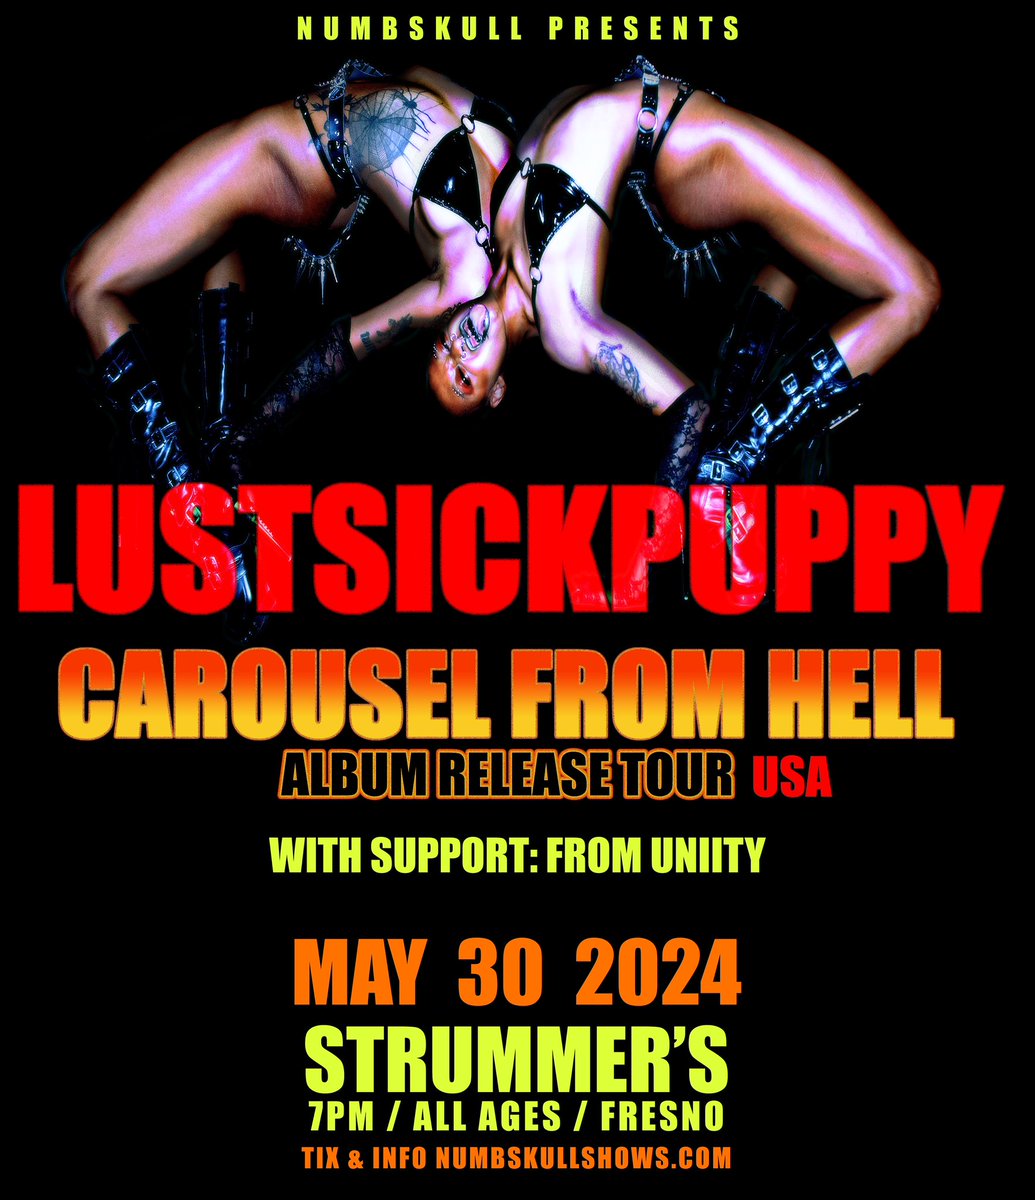 Just announced! The maniacal punky hip hoppy high octane jungle of @lustsickpupppy plus @whoisuniity May 30 @StrummersFresno All Ages event. Tix @ticketweb